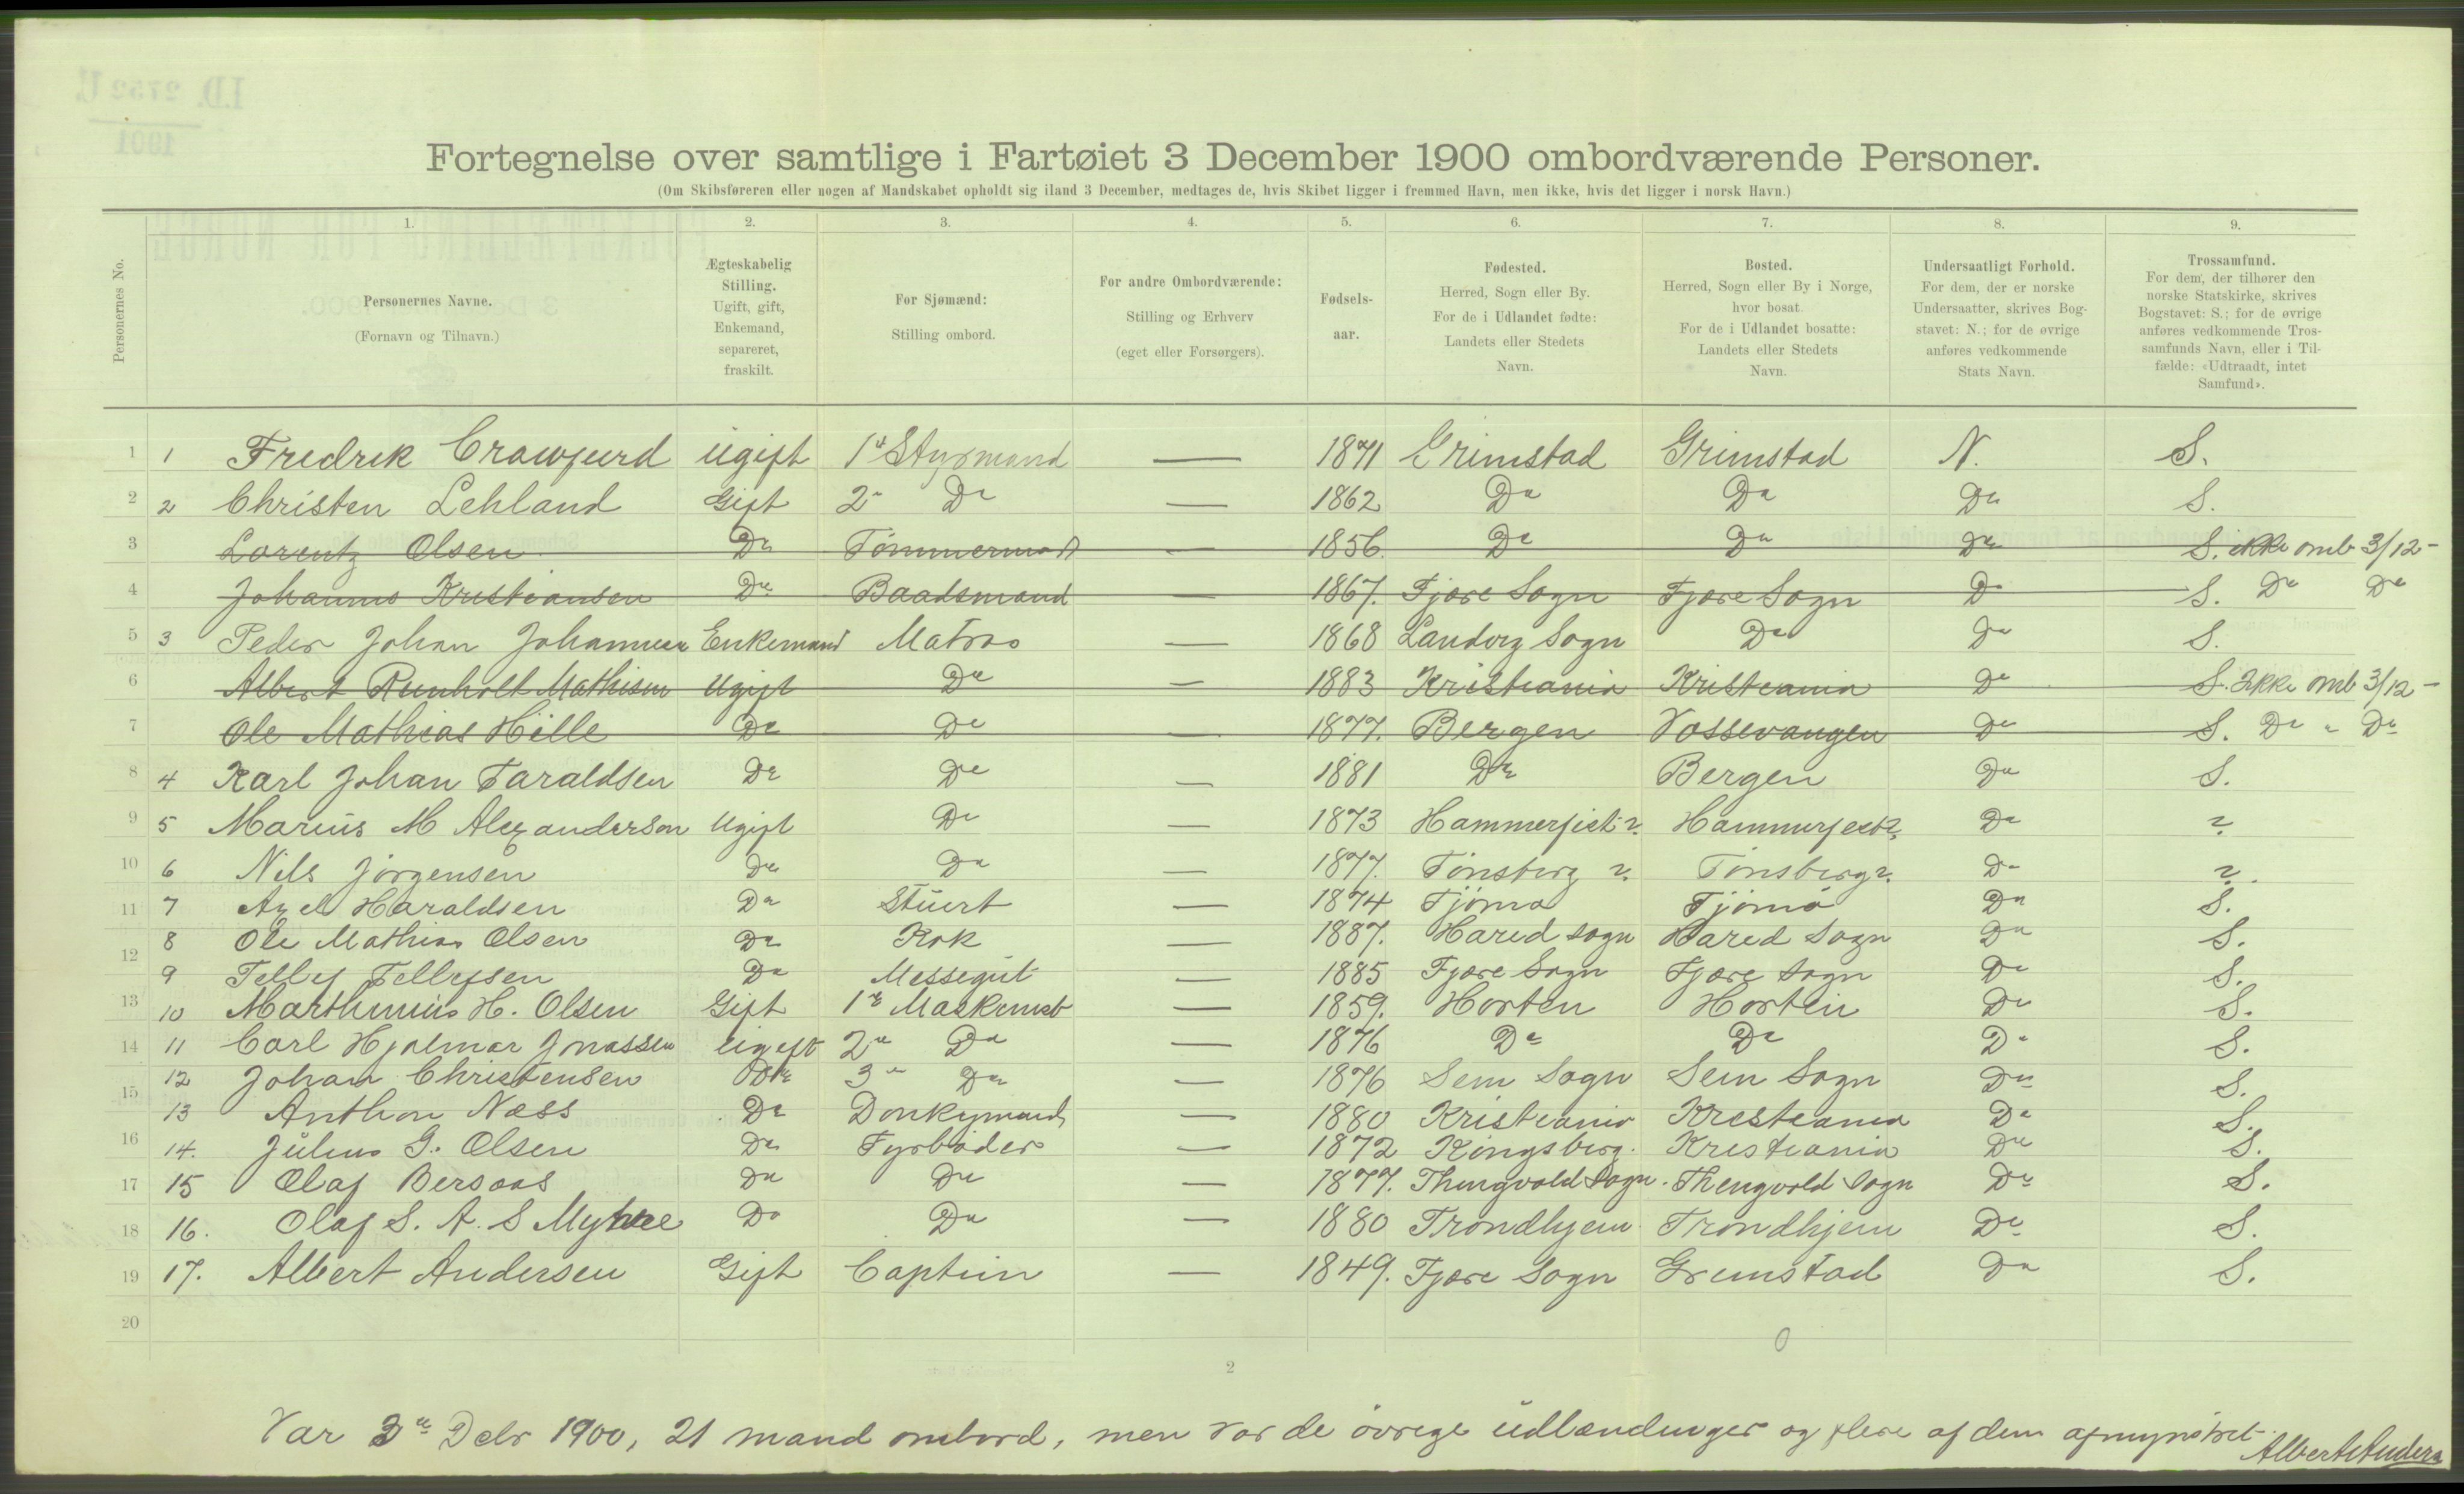 RA, 1900 Census - ship lists from ships in Norwegian harbours, harbours abroad and at sea, 1900, p. 3666